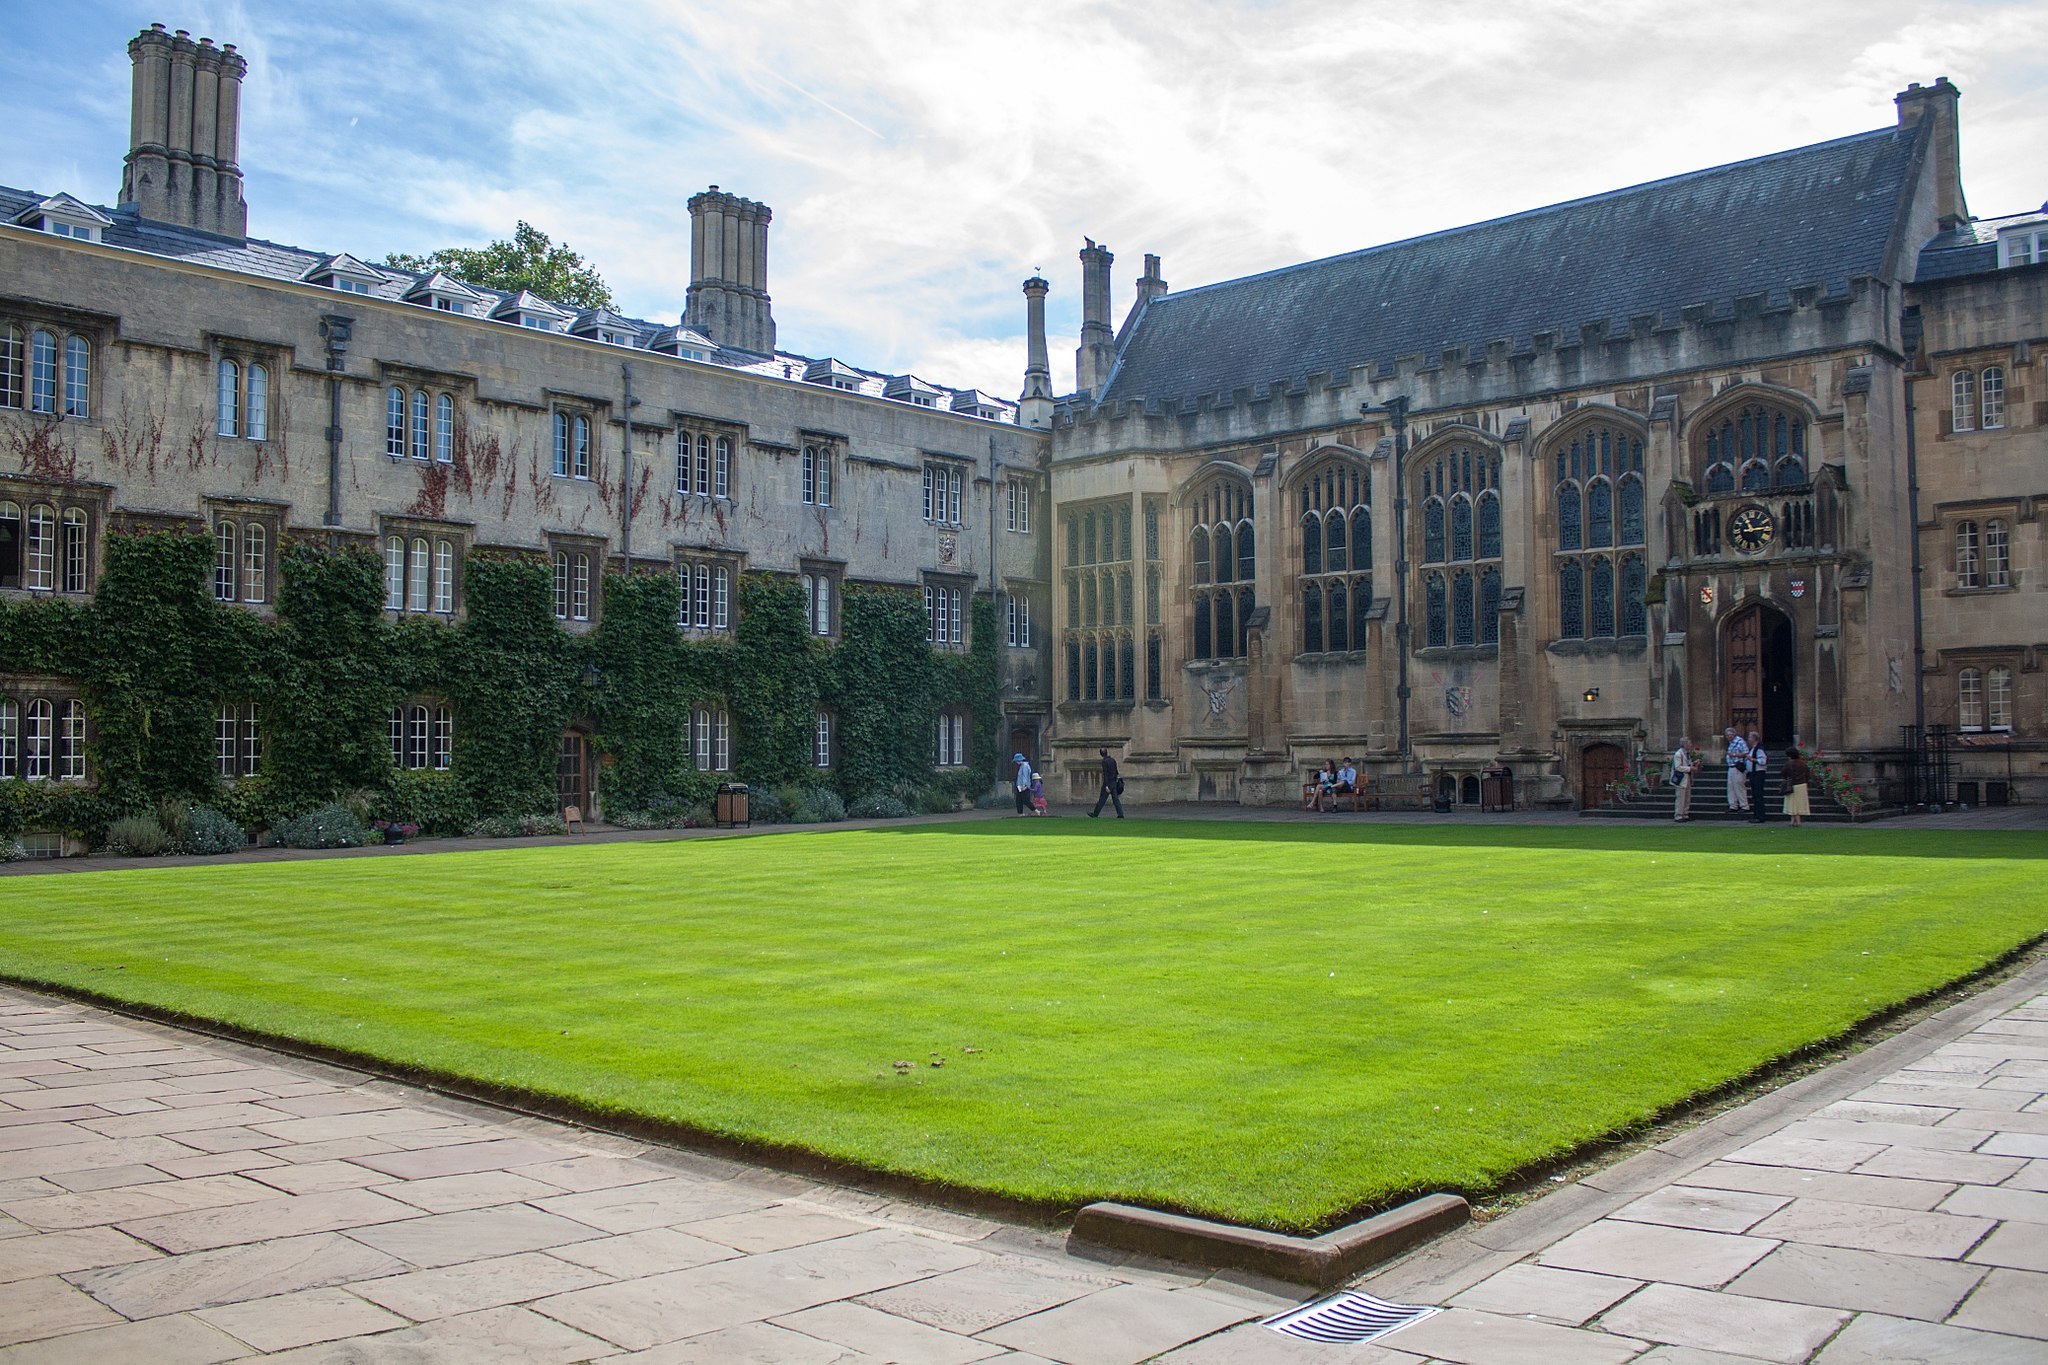 Exeter College, Oxford pic by Simon Q